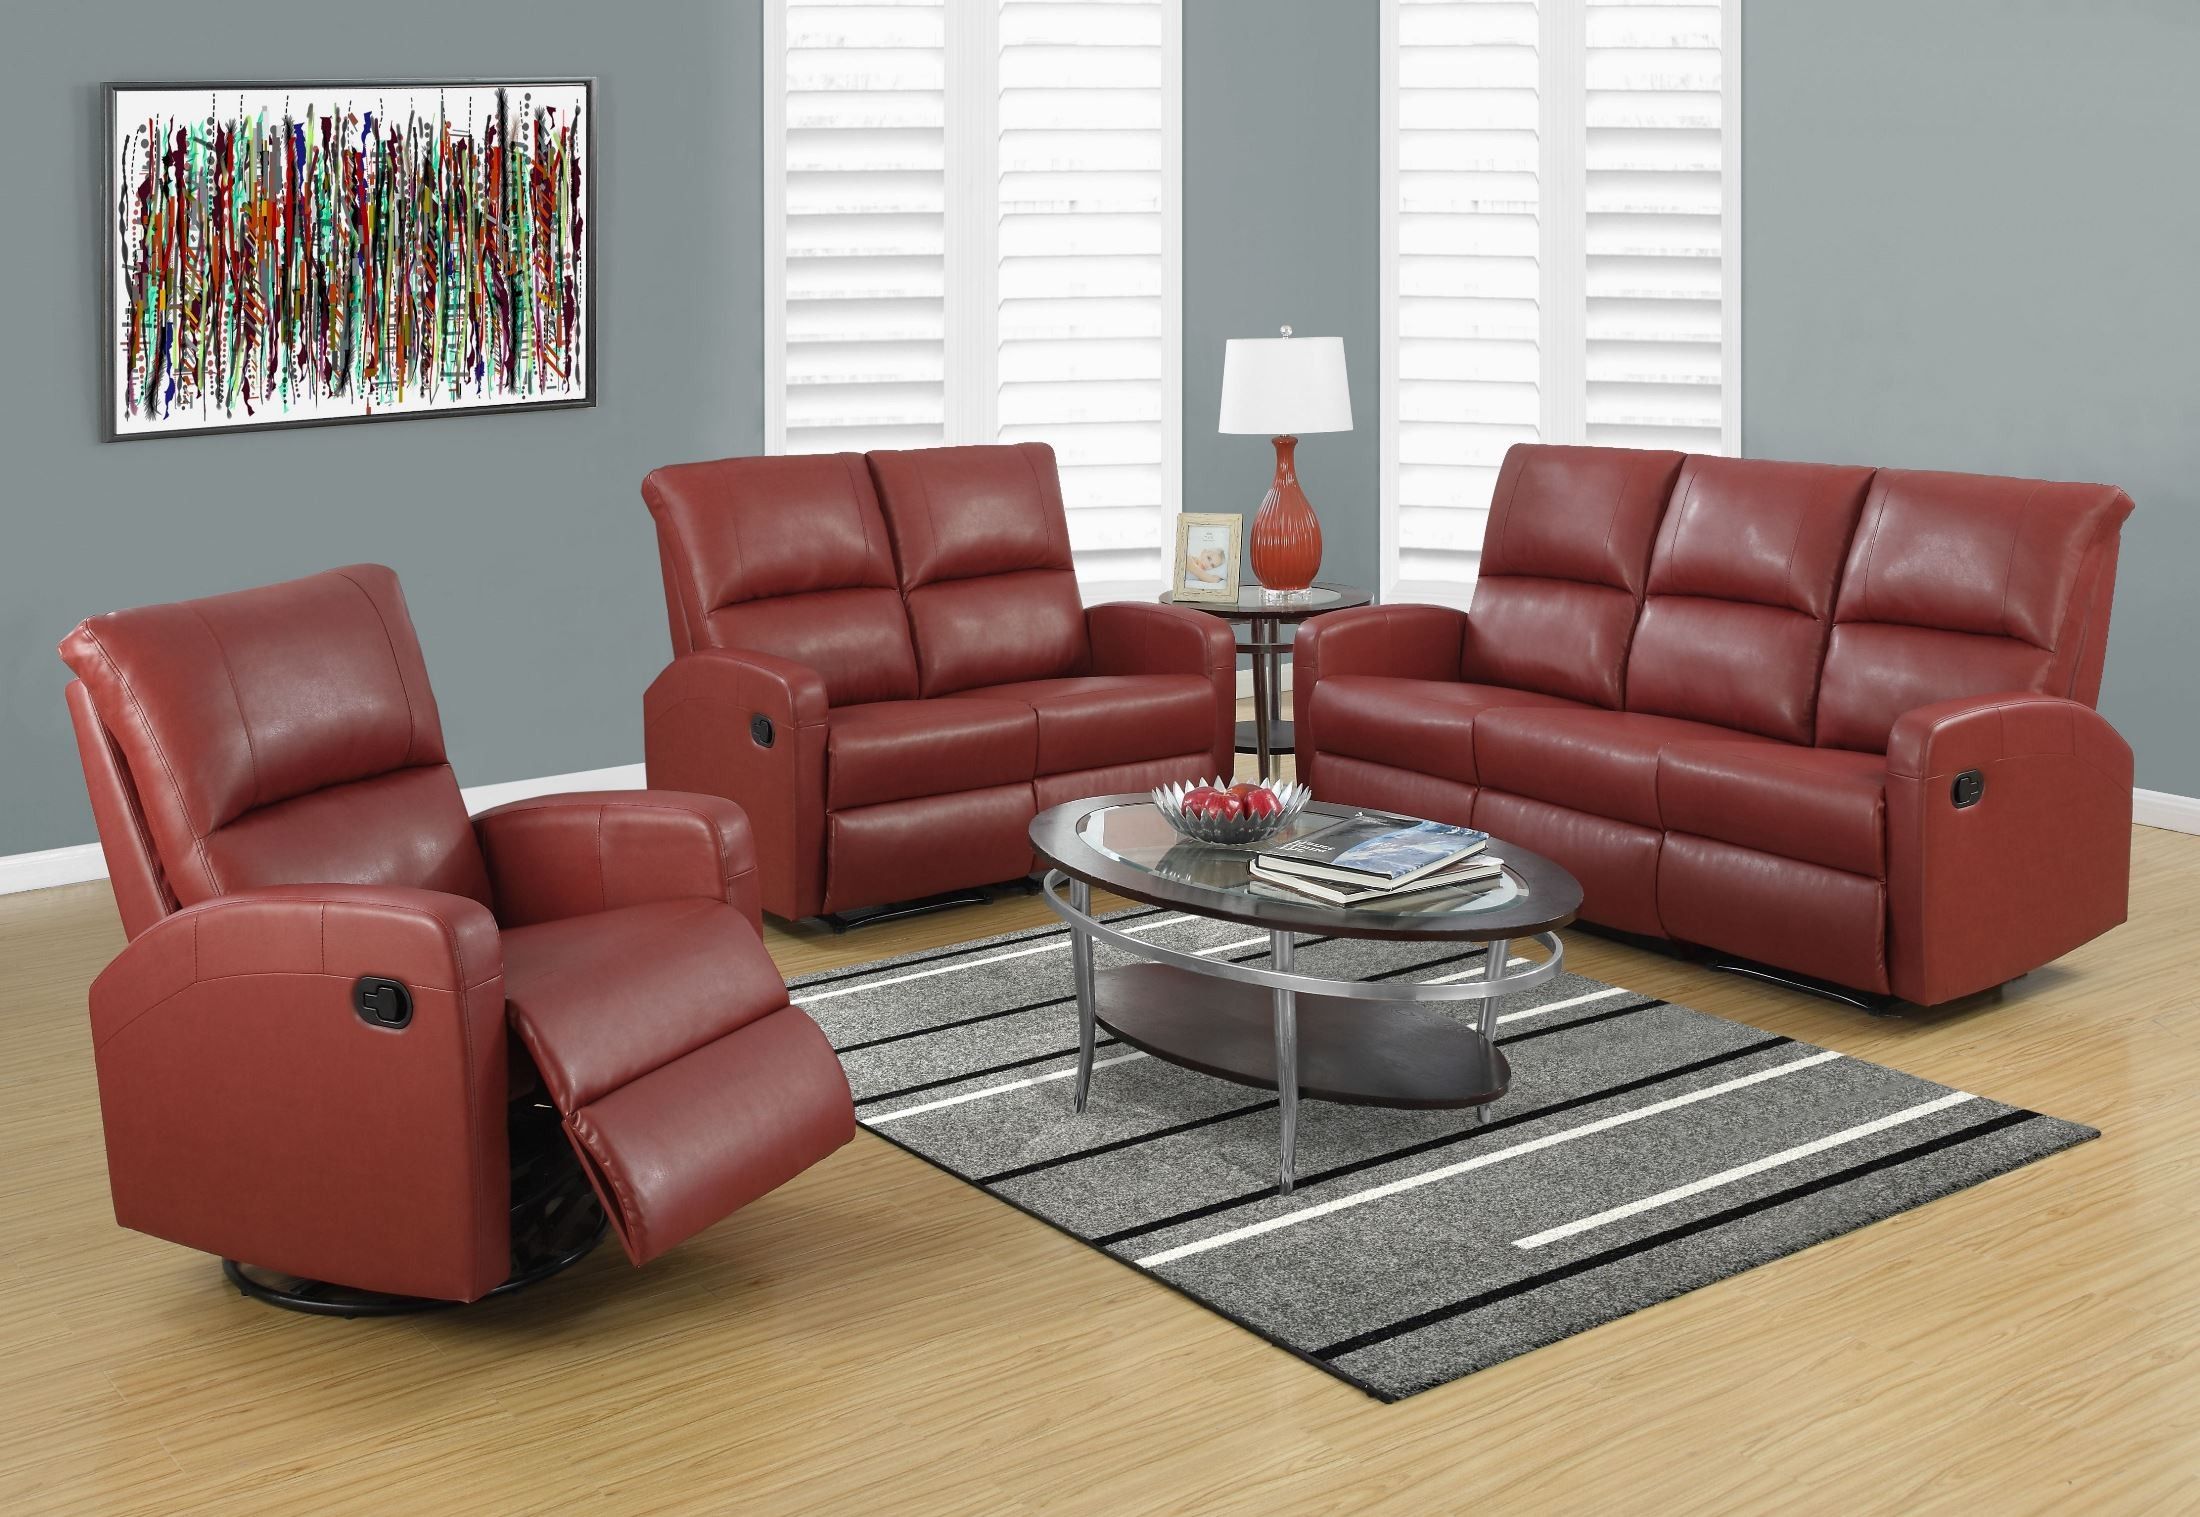 Red Bonded Leather Reclining Sofa From Monarch | Coleman Intended For Bonded Leather All In One Sectional Sofas With Ottoman And 2 Pillows Brown (View 9 of 15)